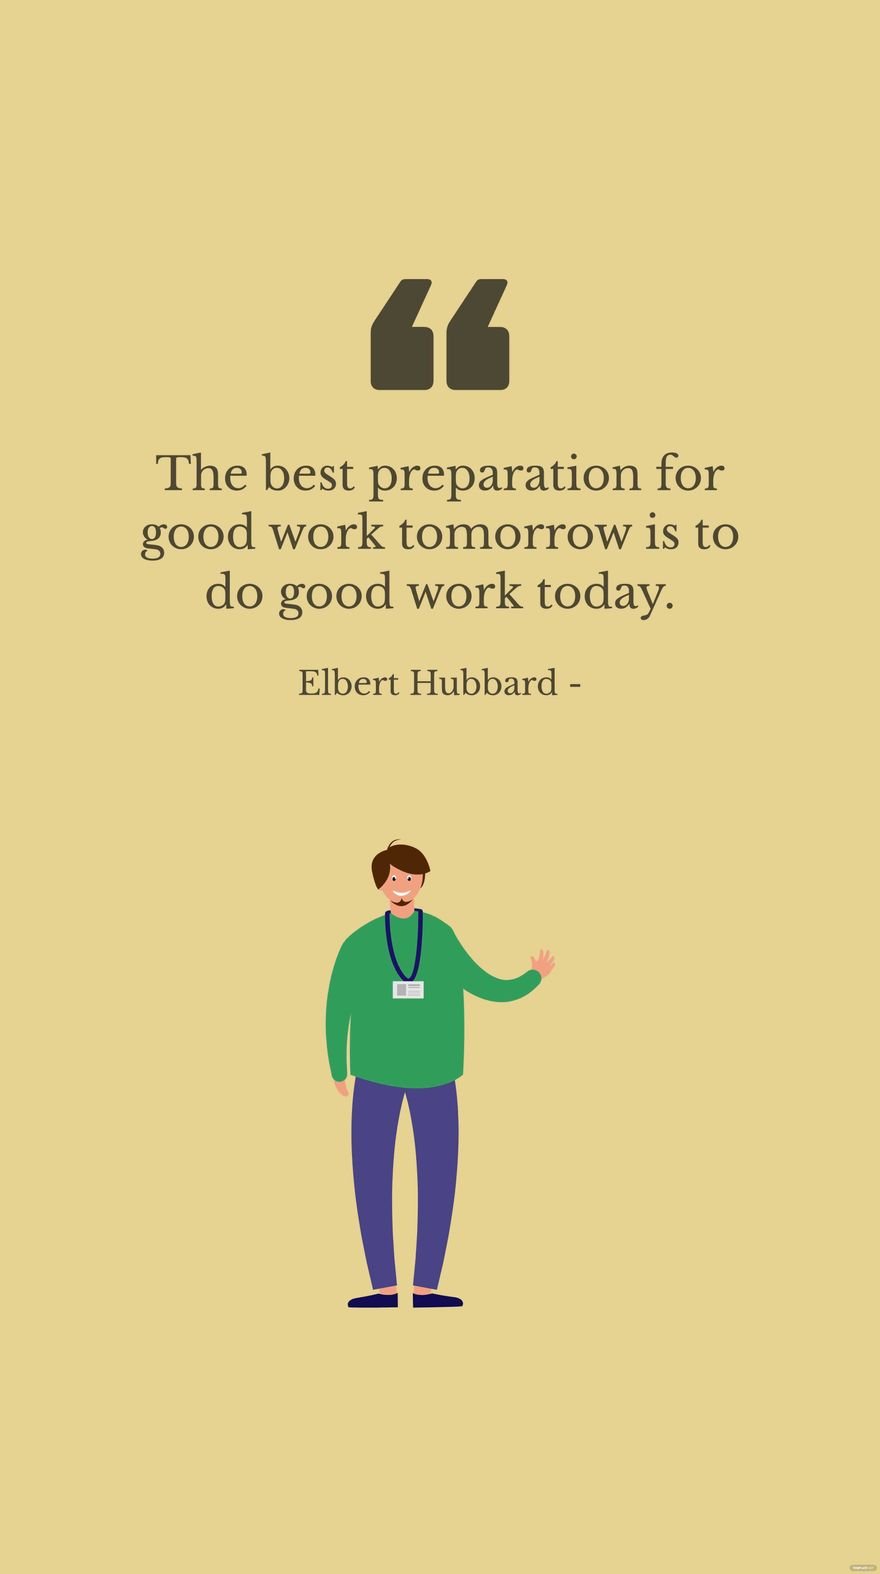 Elbert Hubbard - The best preparation for good work tomorrow is to do good work today.